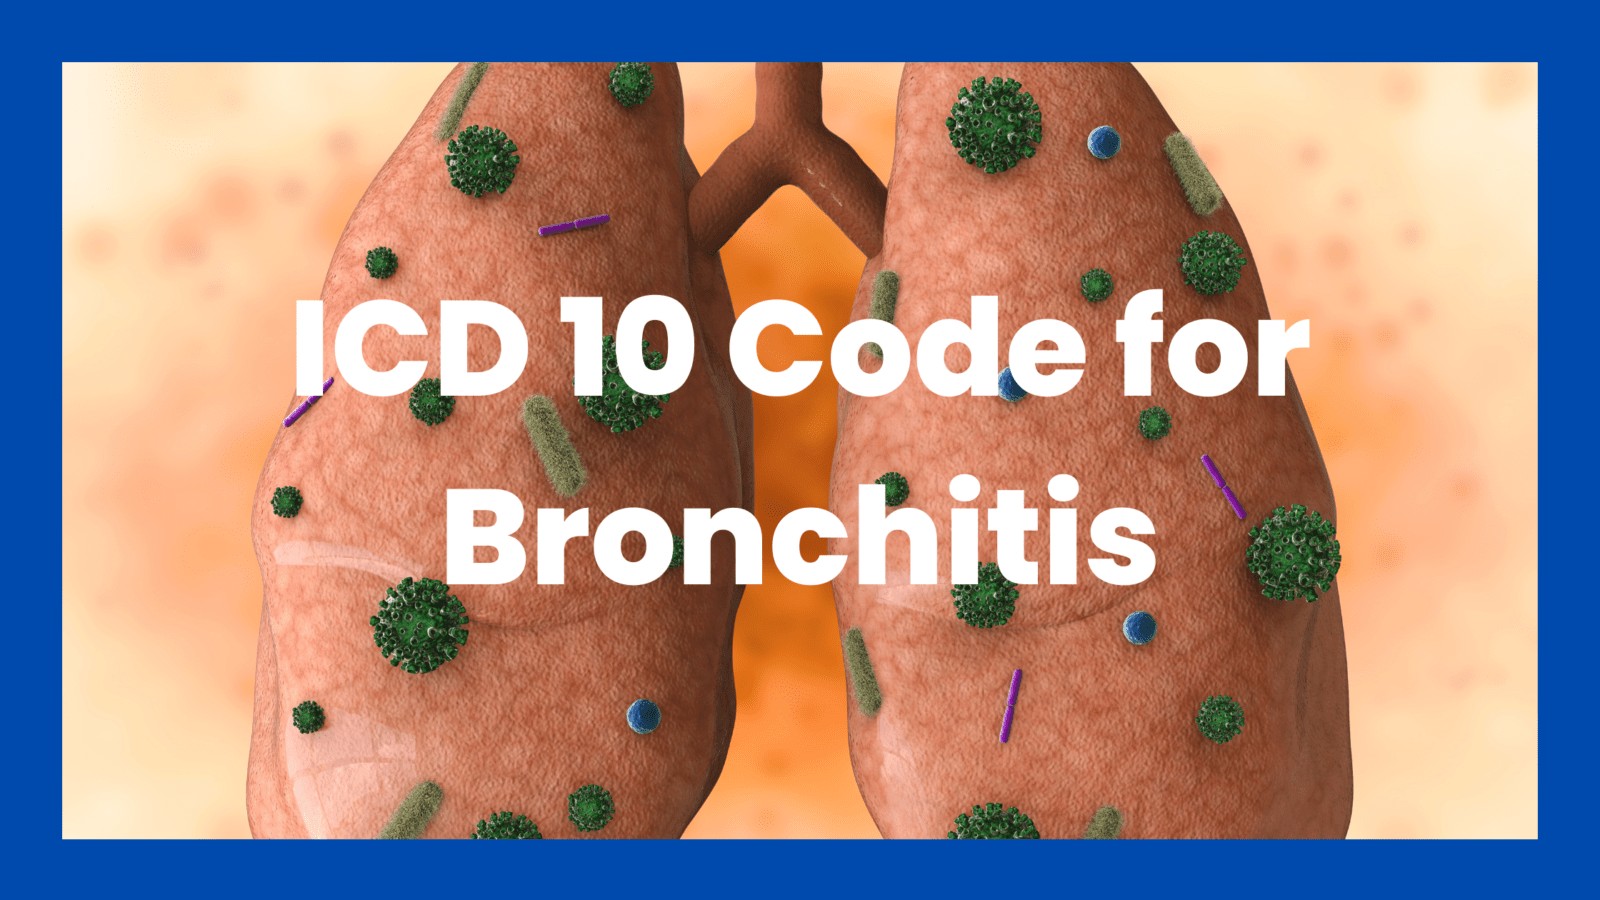 icd 10 code for acute bronchitis